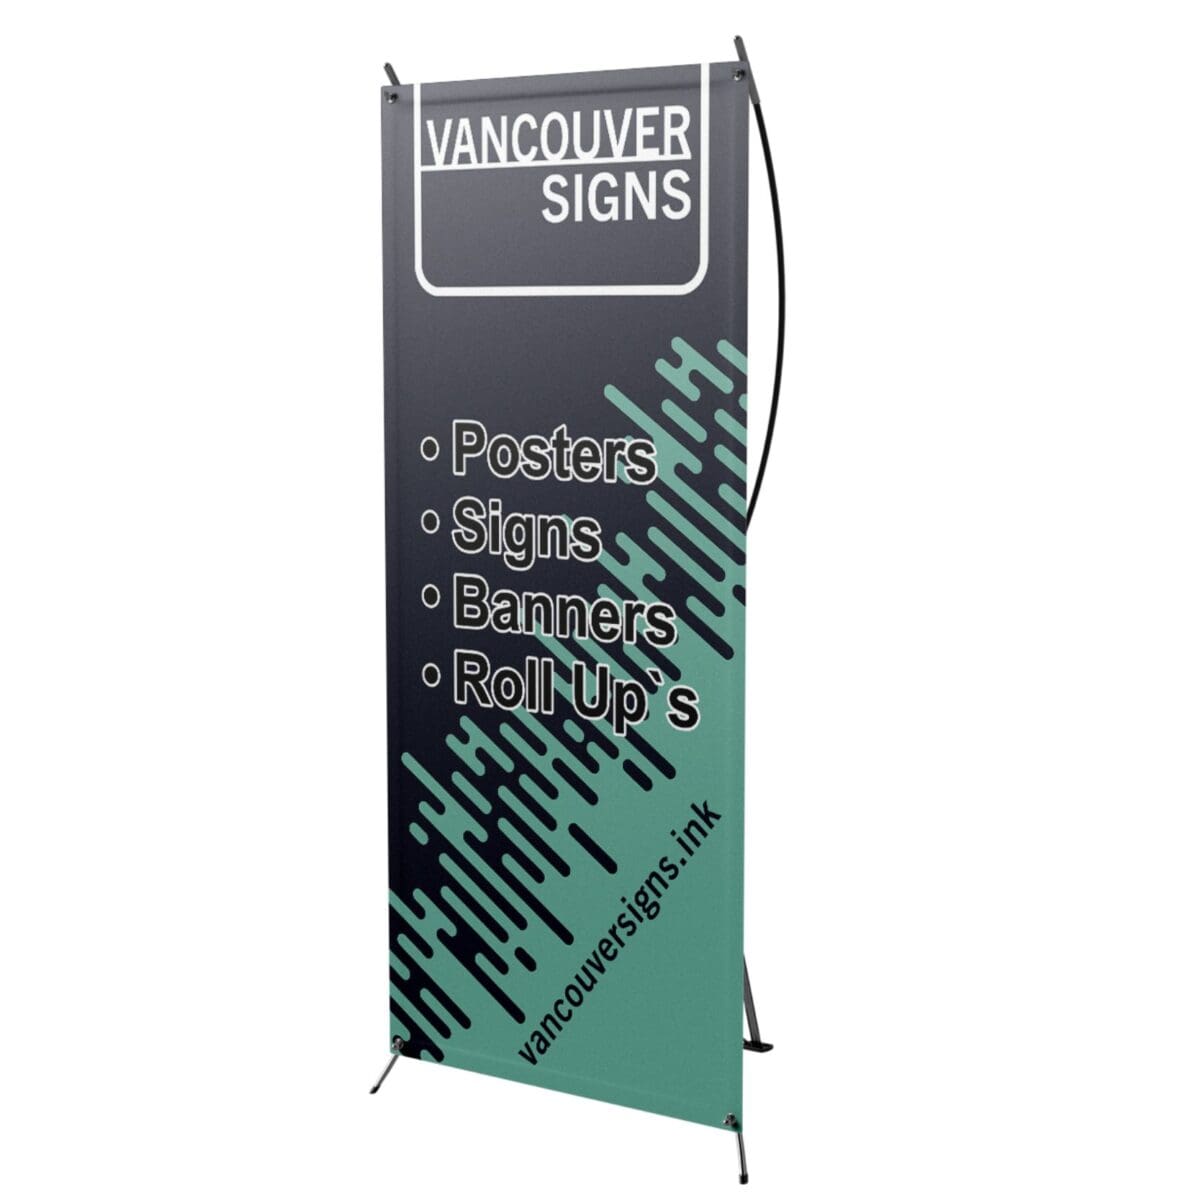 X-Banner stands